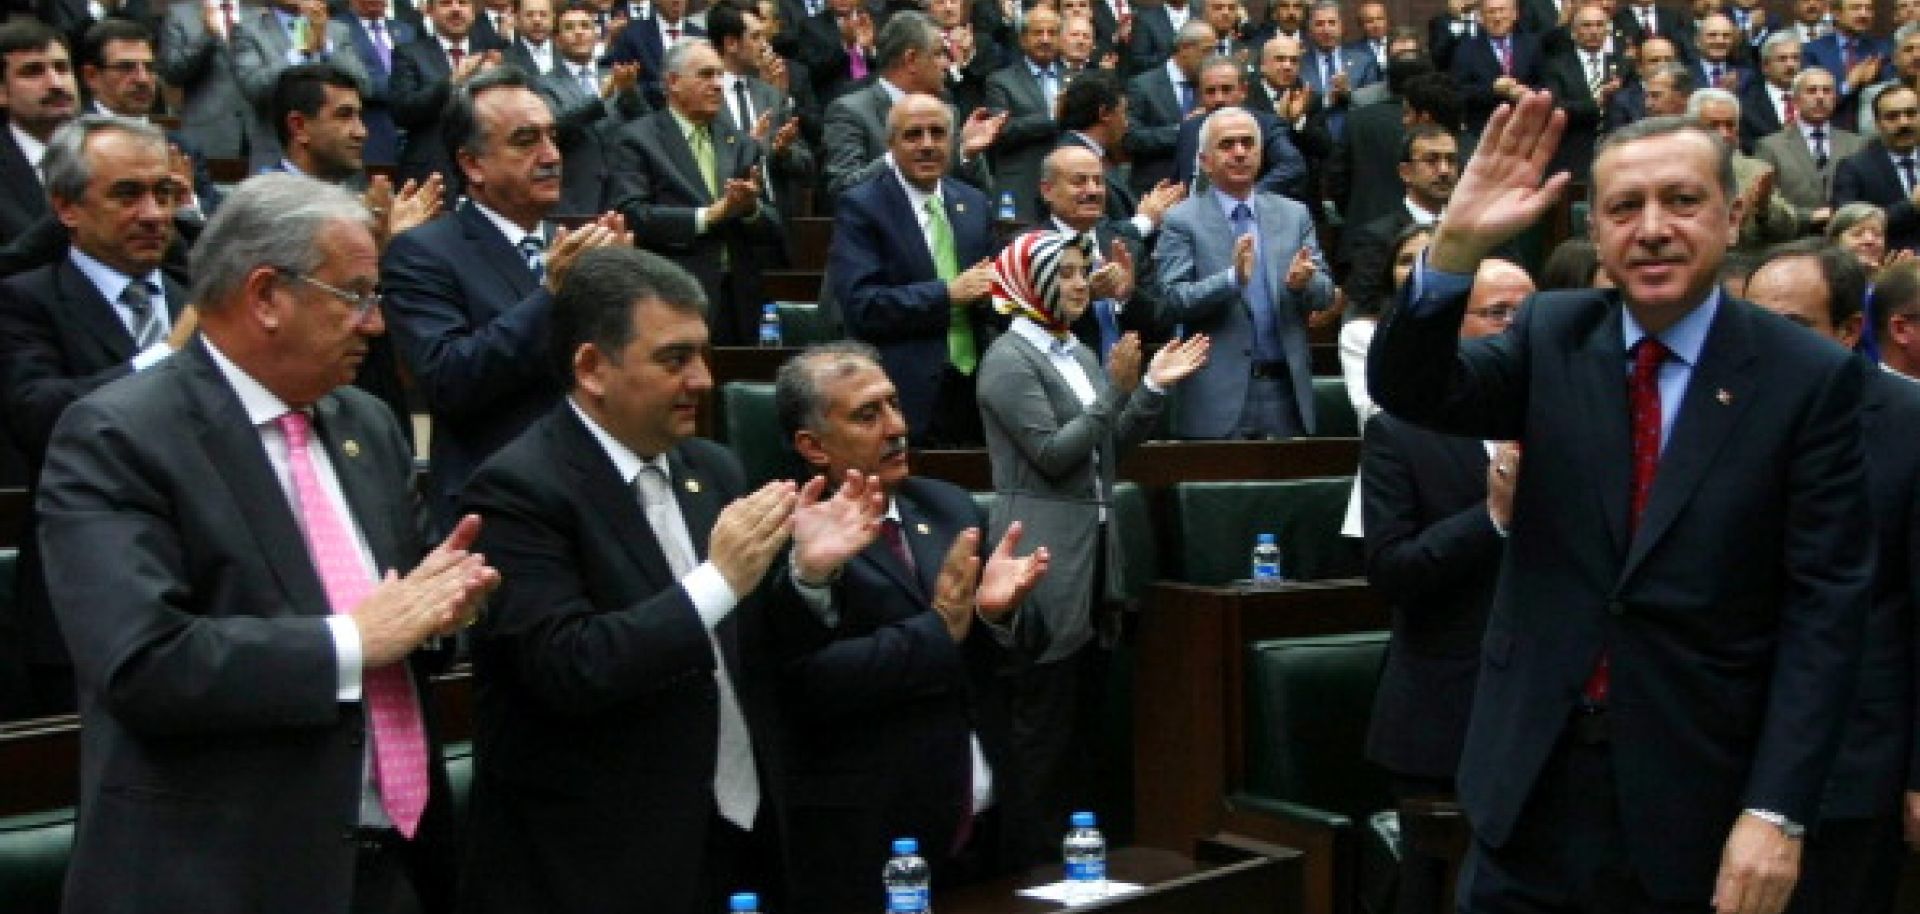 Turkey: The Ruling Party's Transition Strategy